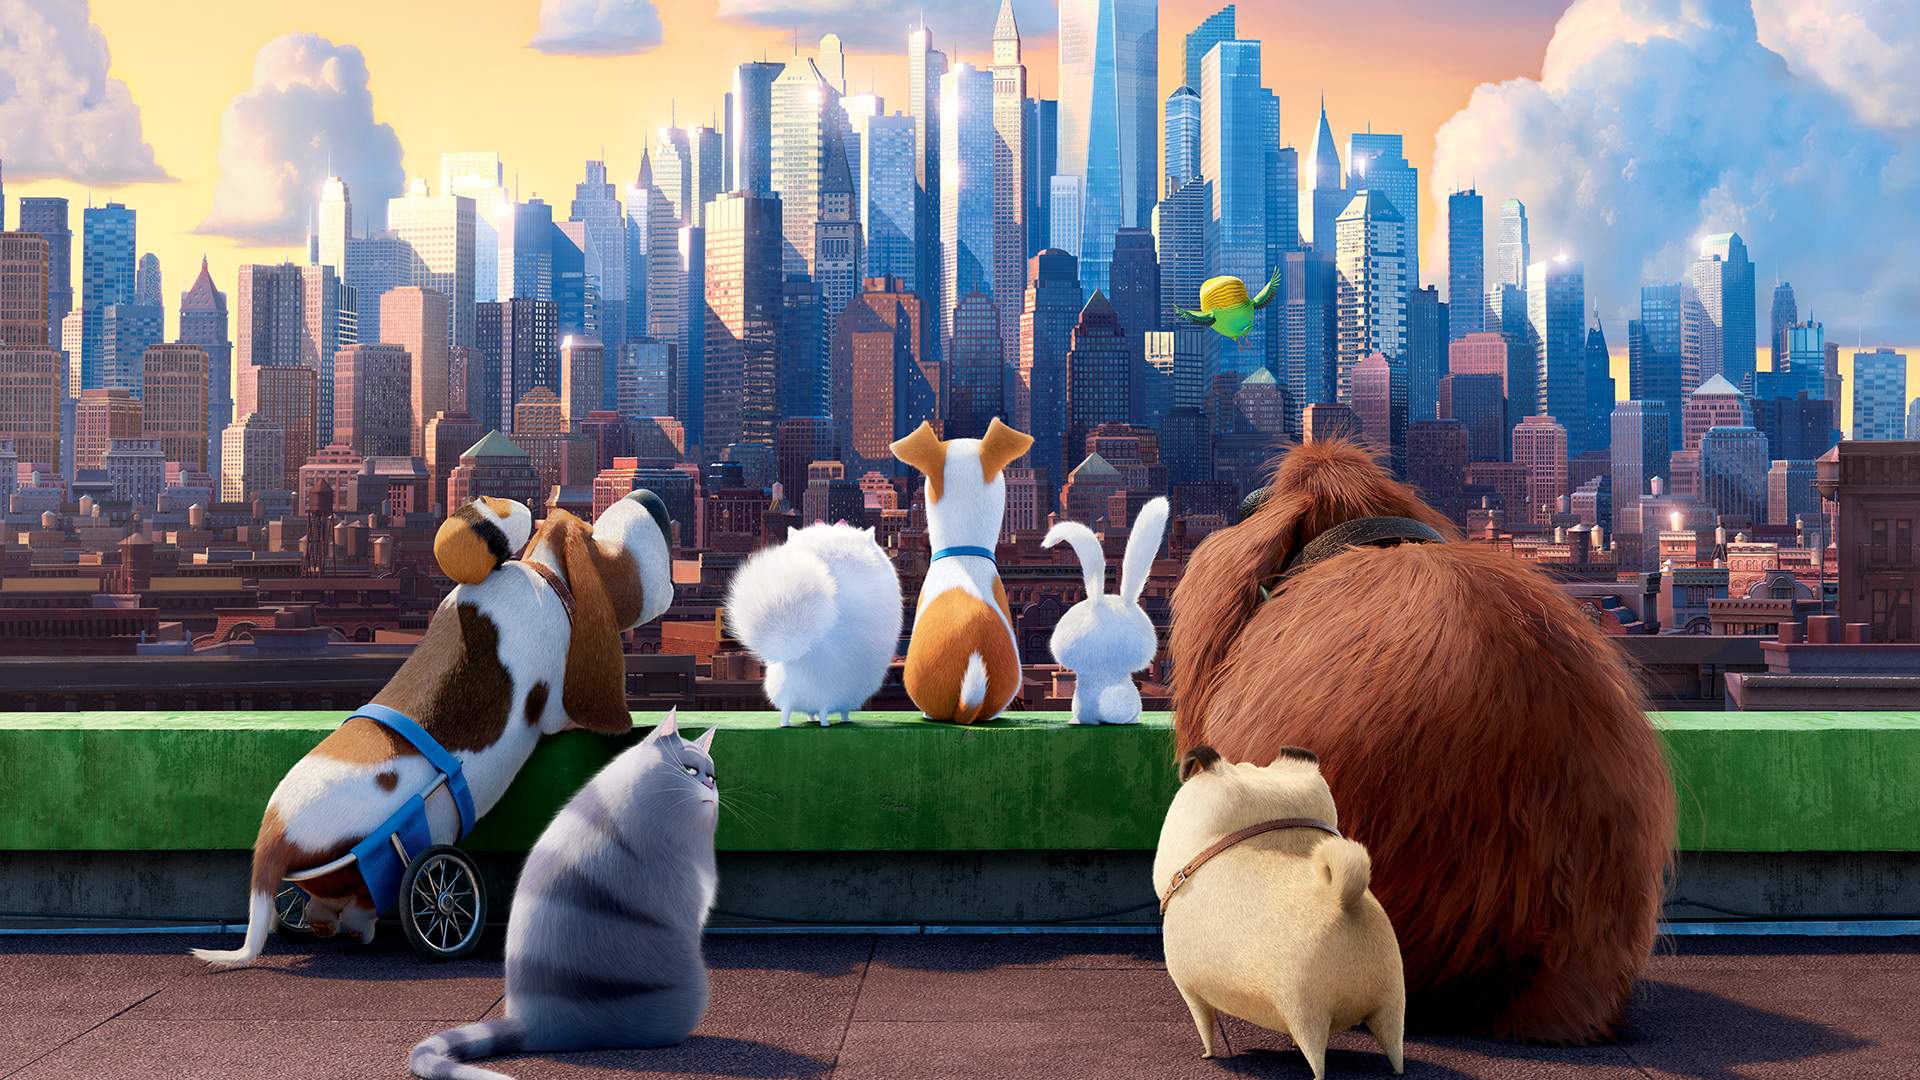 Wallpaper The Secret Life of Pets Animation movie